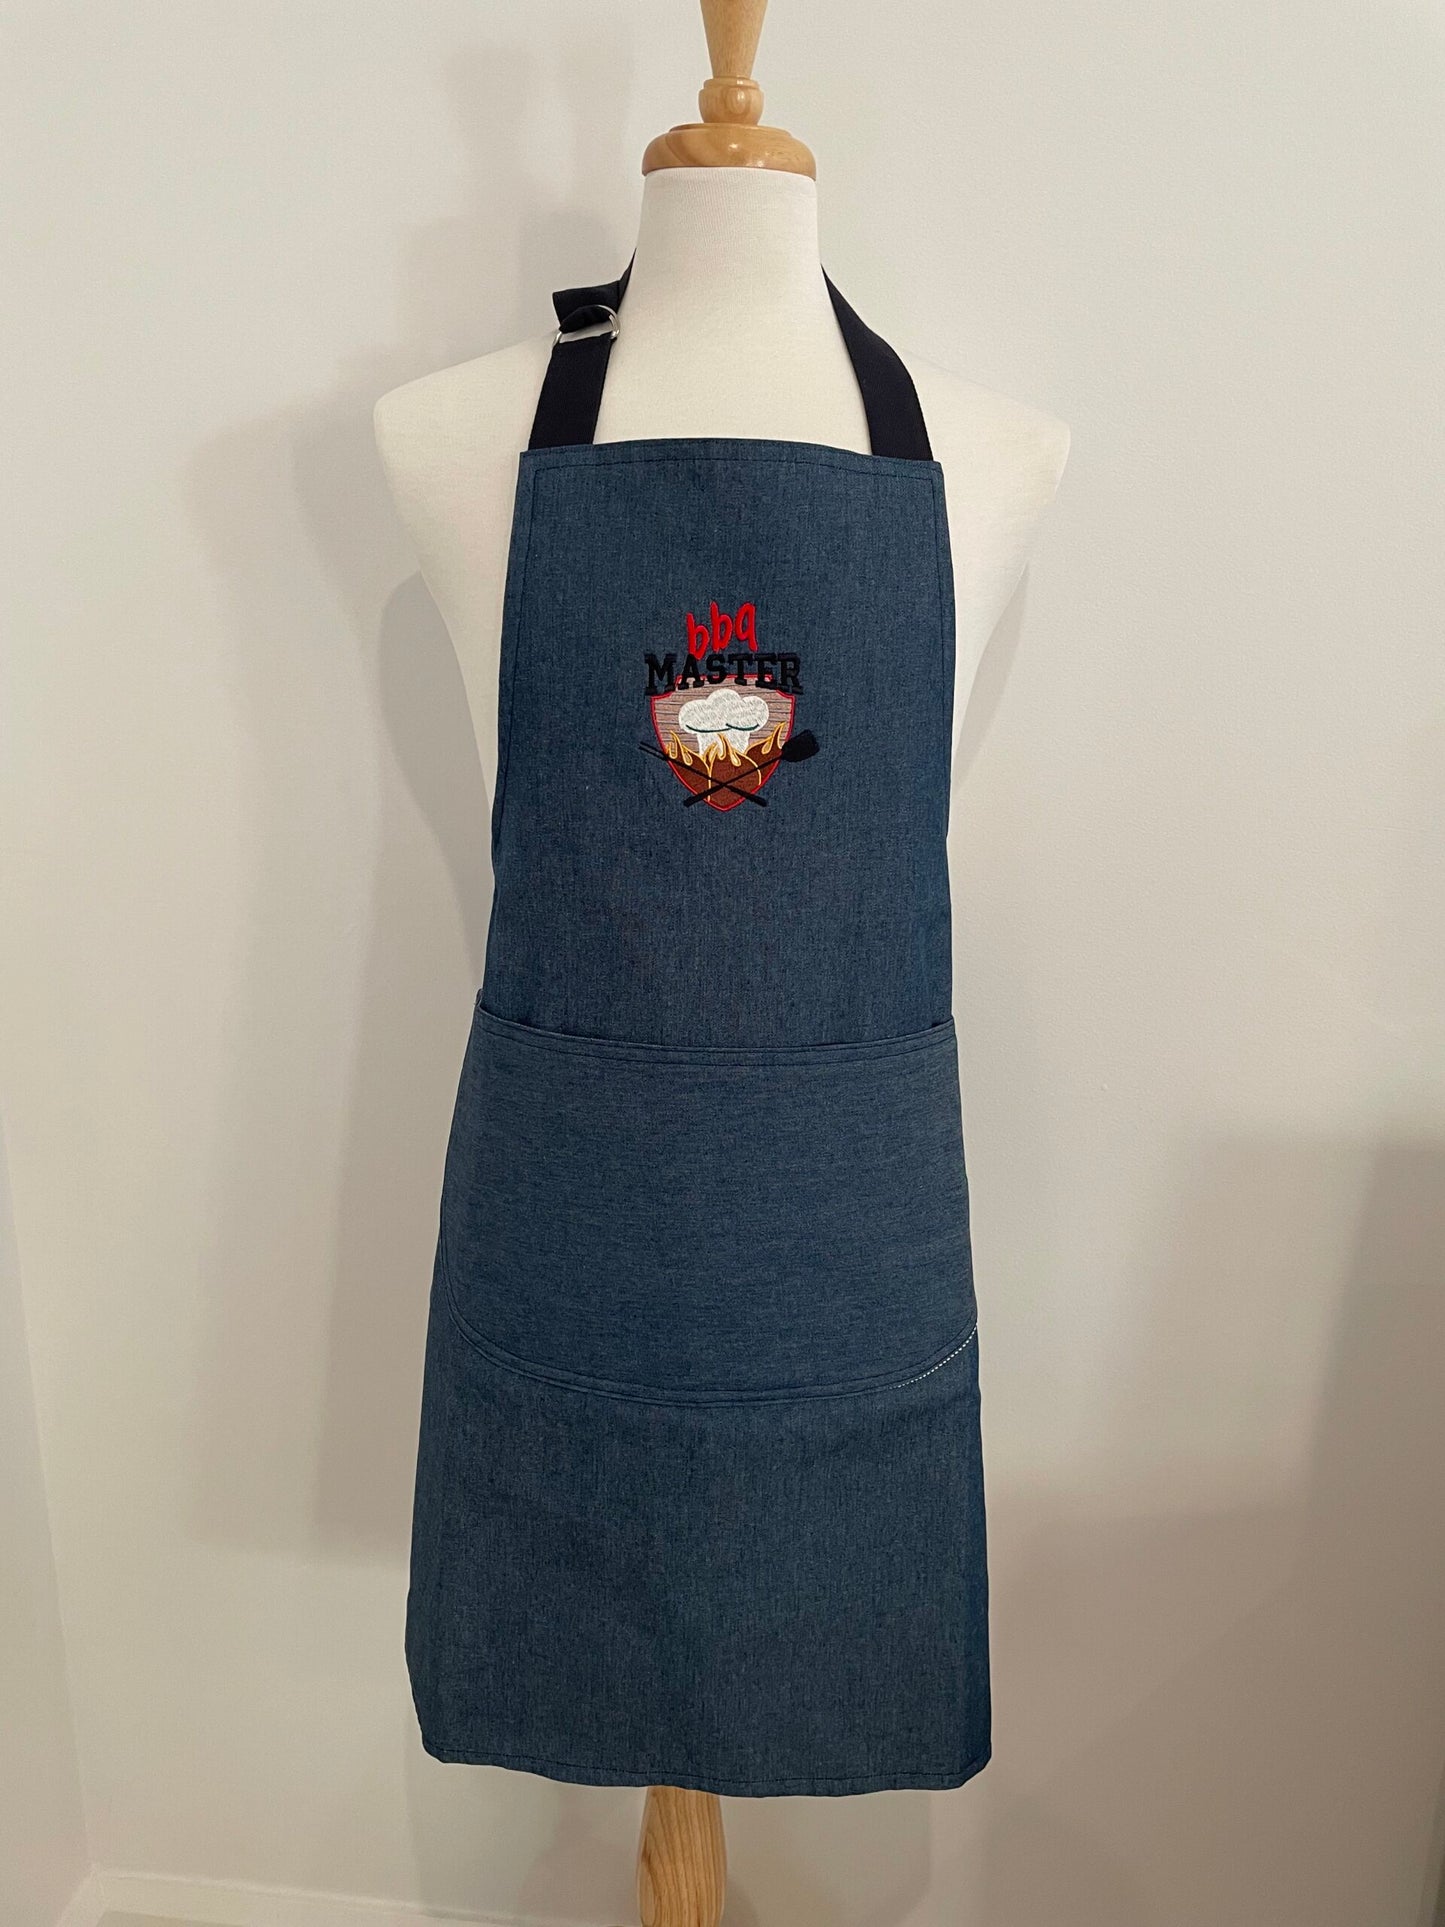 Embroidered BBQ Apron - BBQ Master